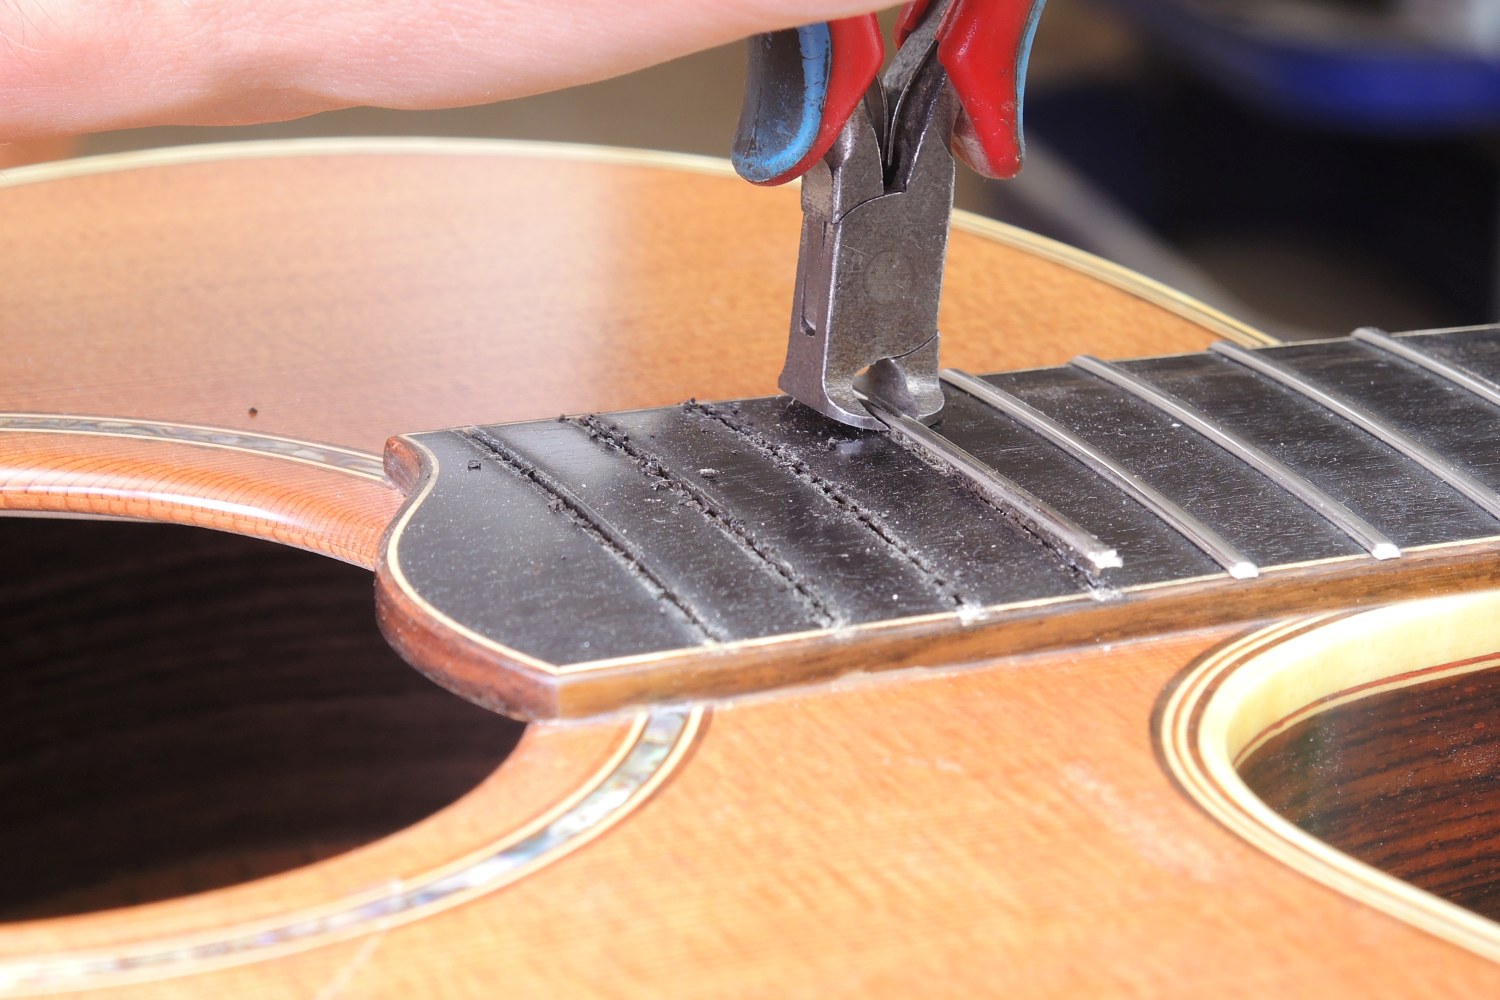 Re-fretting of an acoustic guitar - Removal of the frets